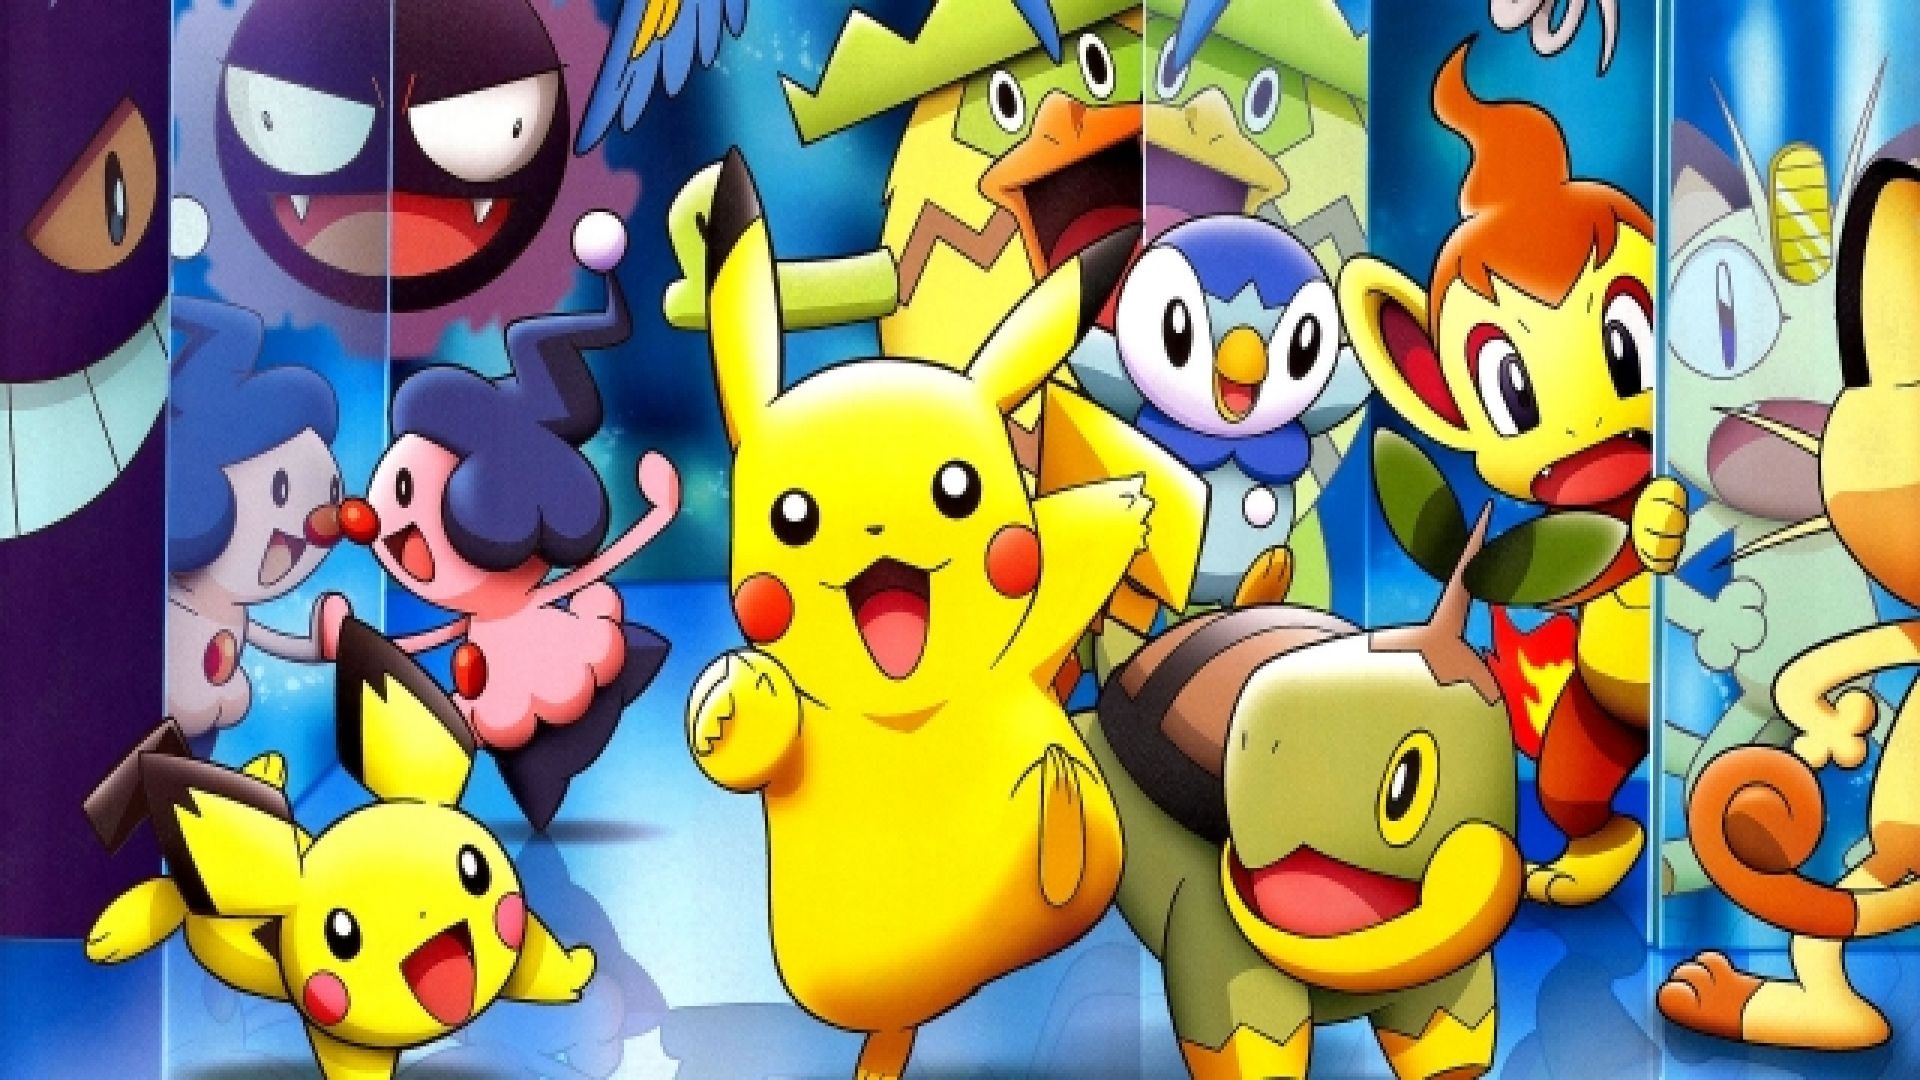 There Are Big Plans In Store For This Year's Pokémon Day